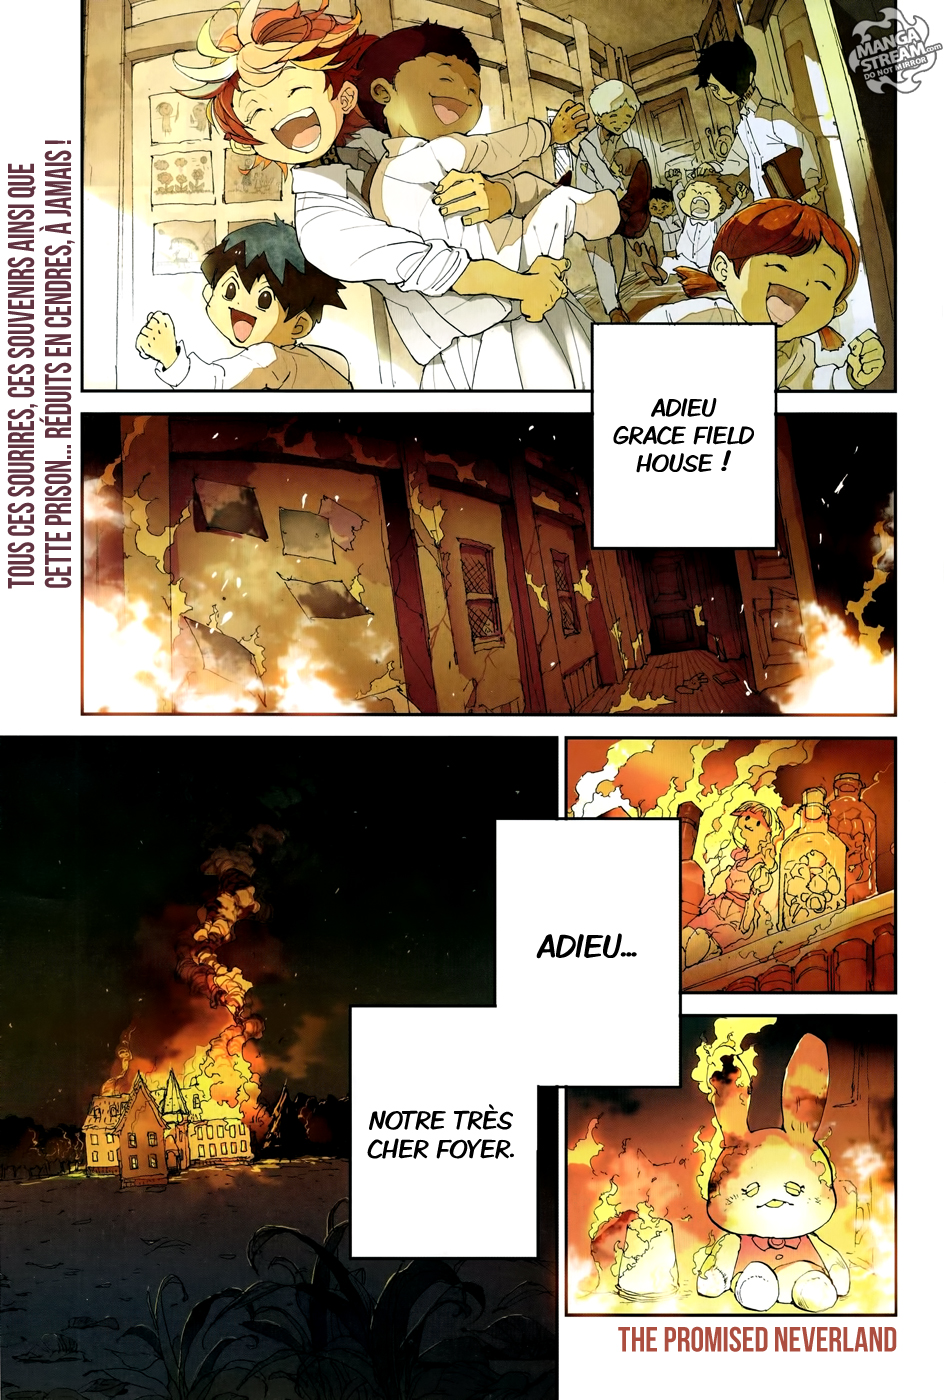 The Promised Neverland: Chapter chapitre-37 - Page 2